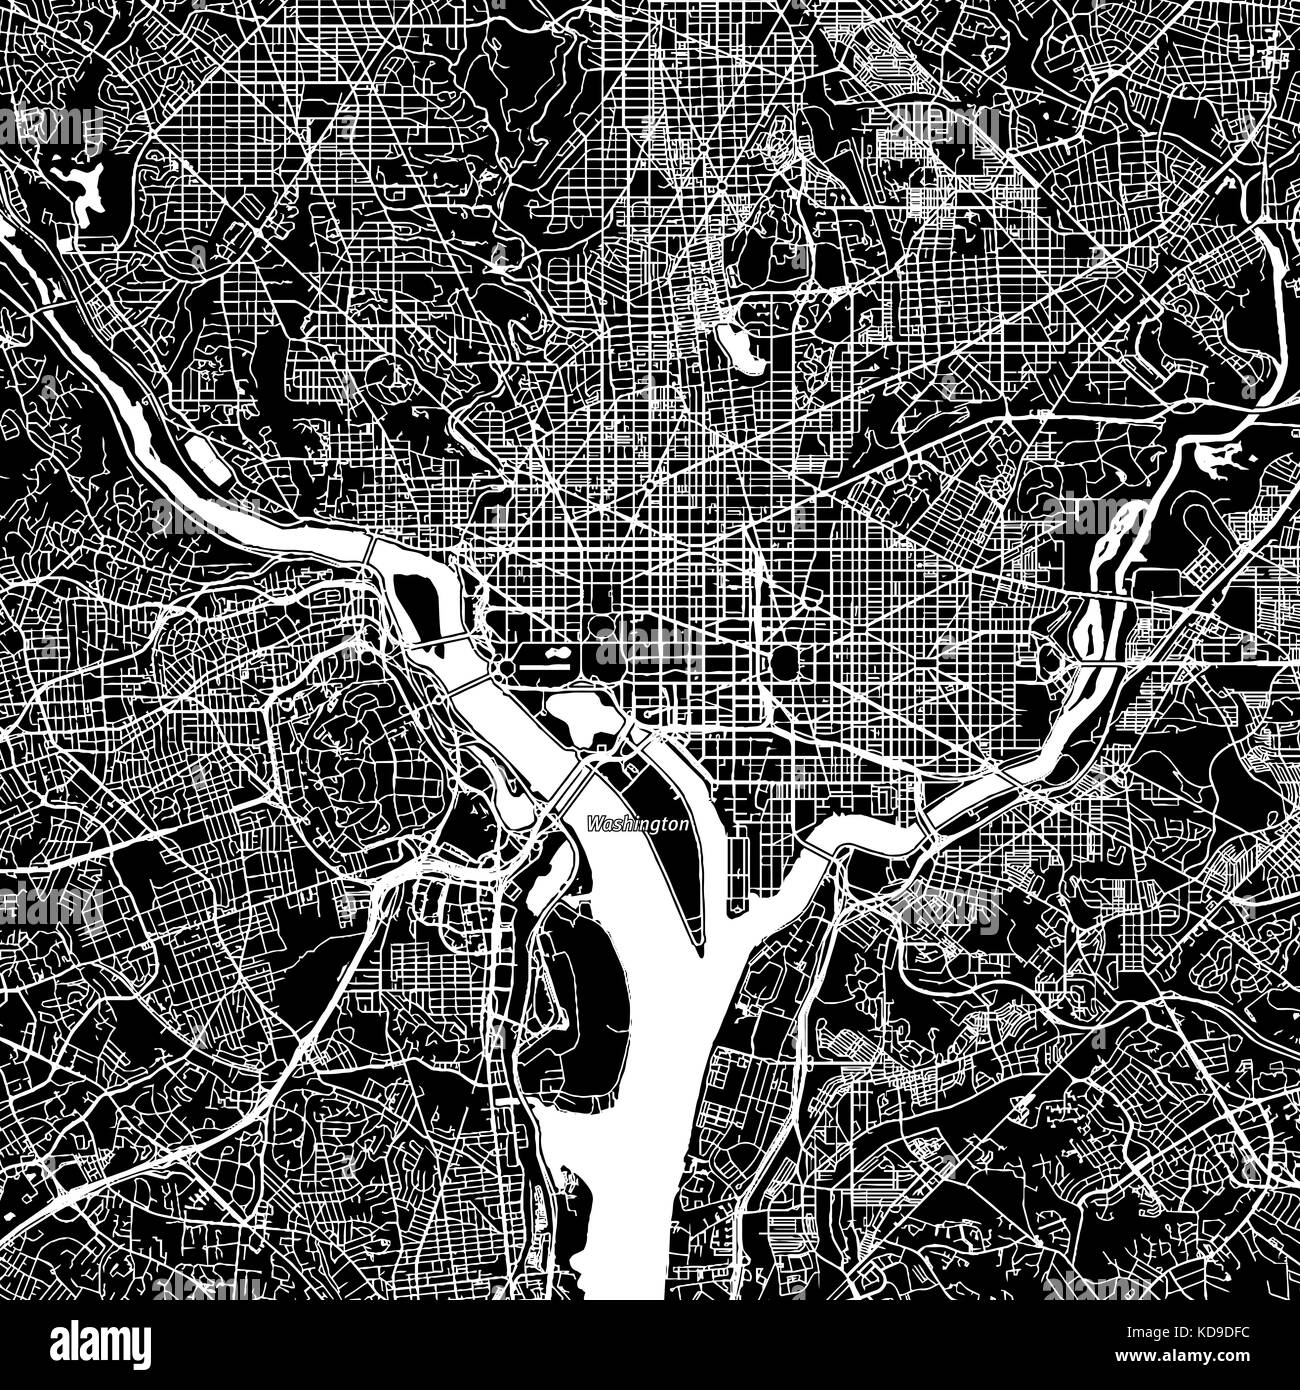 Washington, District of Columbia. Downtown vector map. City name on a separate layer. Art print template. Black and white. Stock Photo